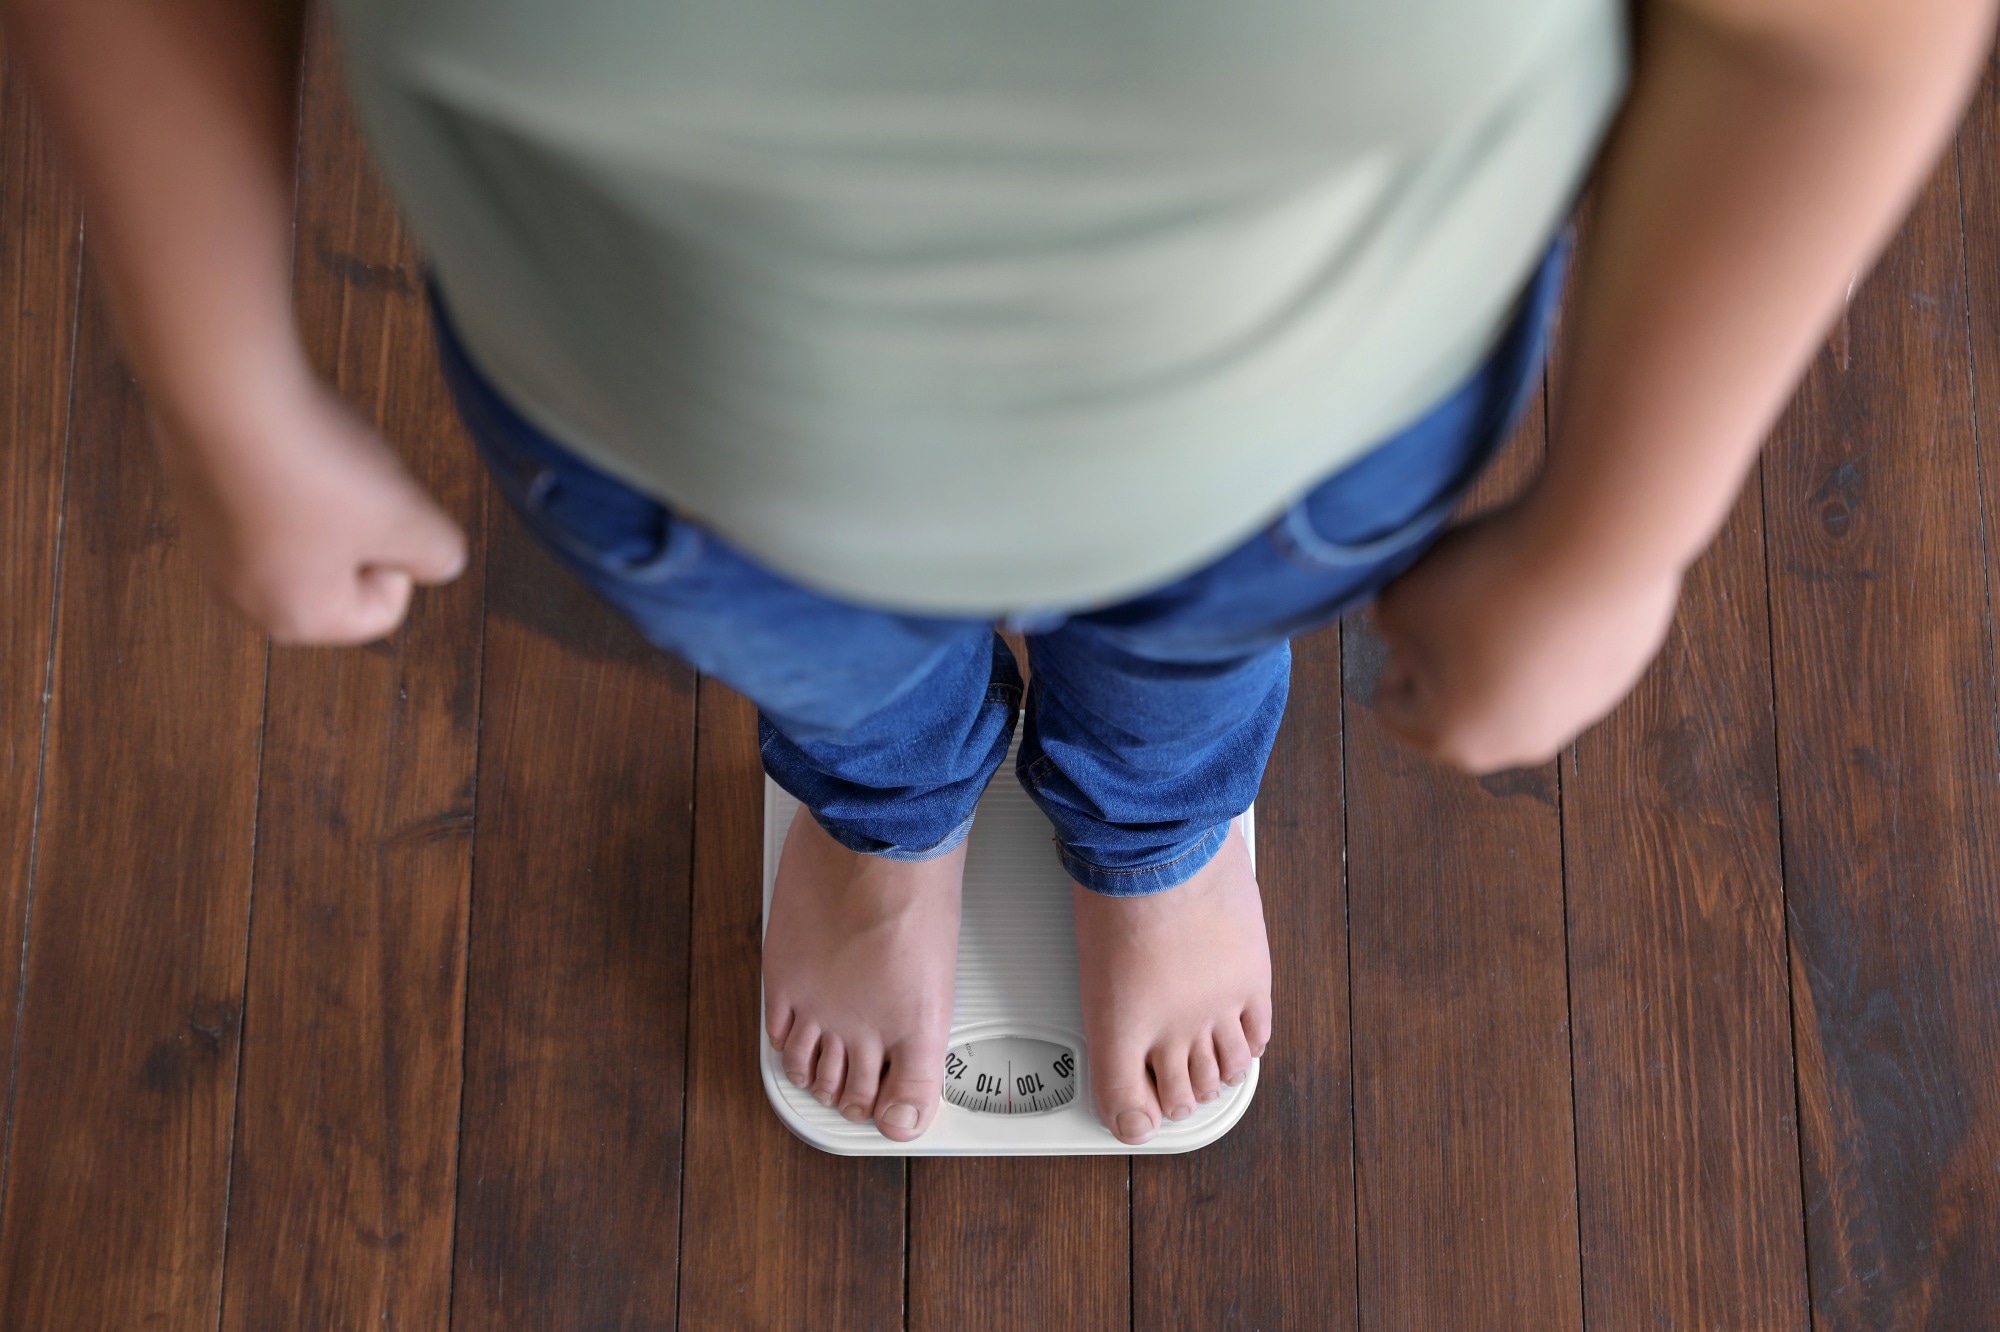 Study: Are children living with obesity more likely to experience musculoskeletal symptoms during childhood? A linked longitudinal cohort study using primary care records. Image Credit: New Africa/Shutterstock.com